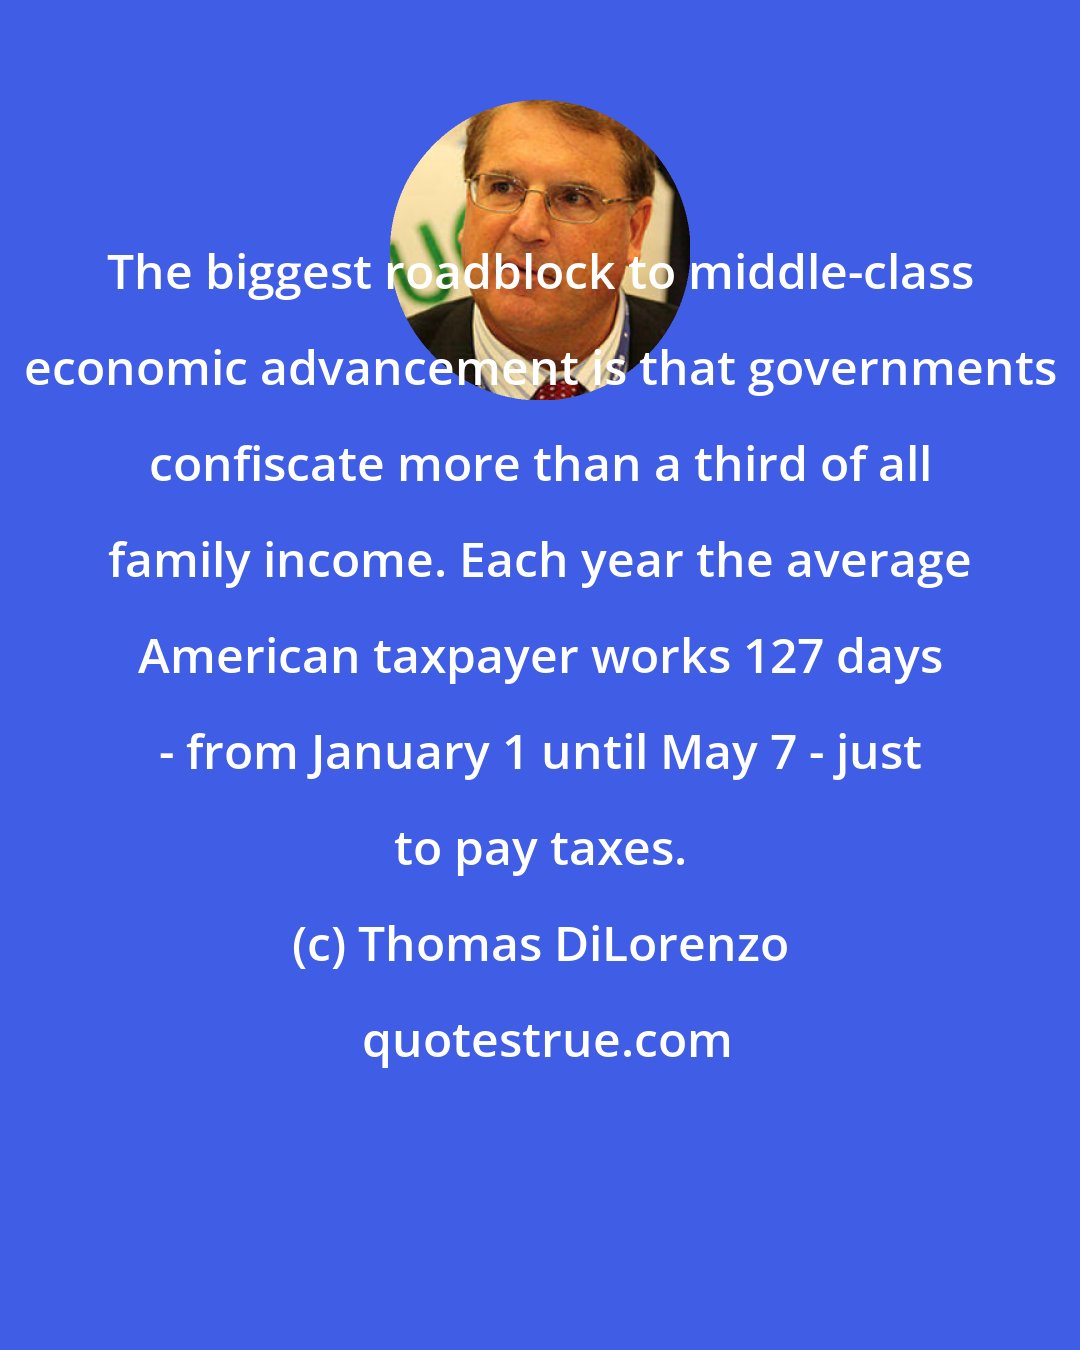 Thomas DiLorenzo: The biggest roadblock to middle-class economic advancement is that governments confiscate more than a third of all family income. Each year the average American taxpayer works 127 days - from January 1 until May 7 - just to pay taxes.